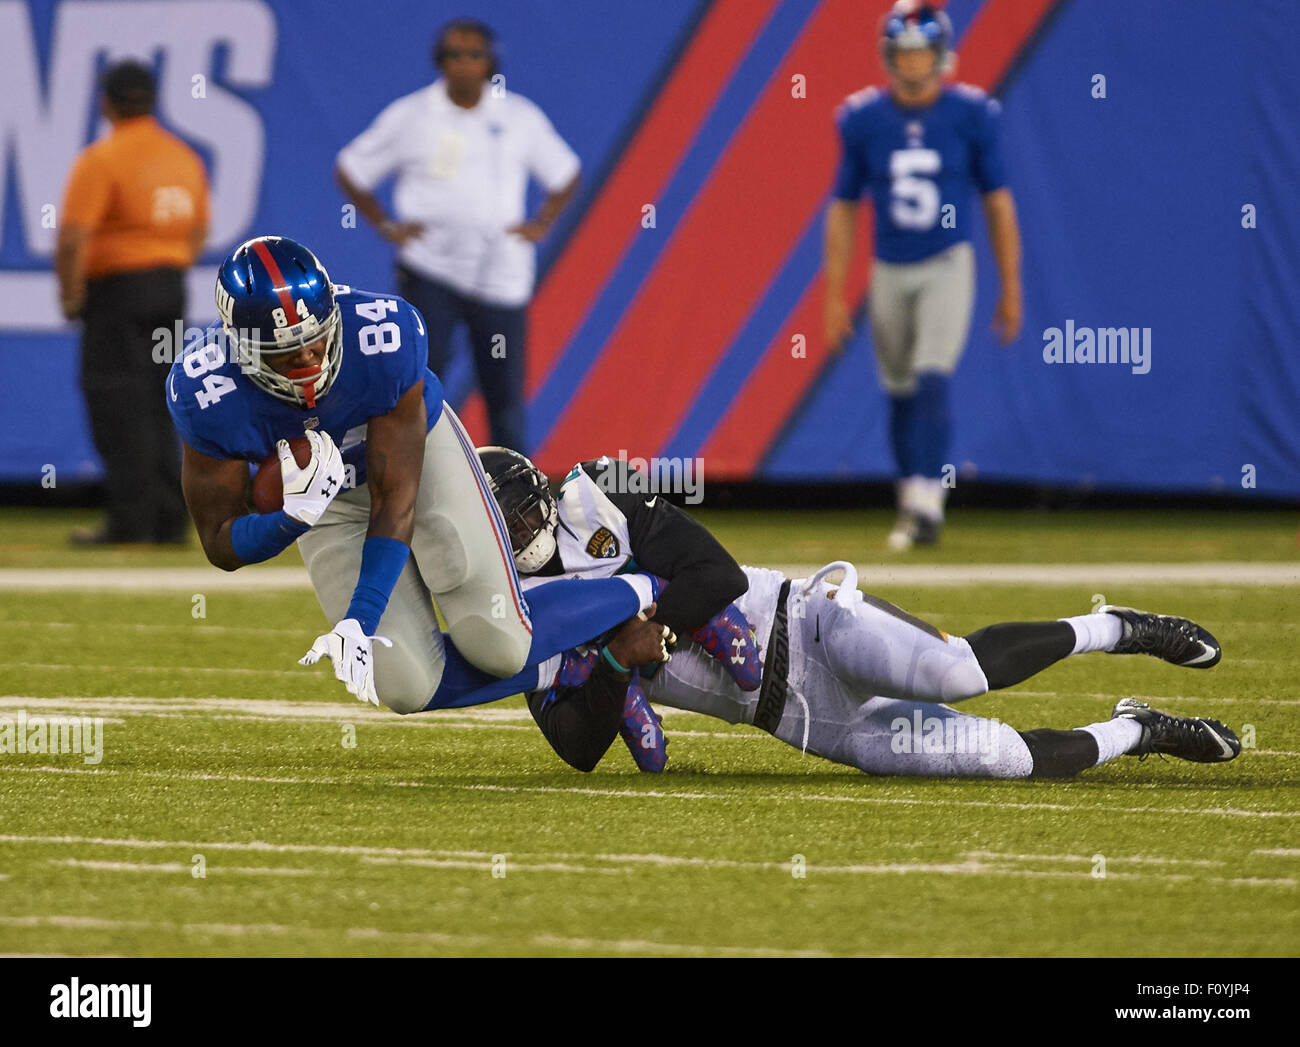 East Rutherford, New Jersey, USA. 22nd Aug, 2015. Giants' tight end Larry Donnell (84) is tackled by Jaguars' safety Craig Loston (20) in the first half during preseason action between the Jacksonville Jaguars and the New York Giants at MetLife Stadium in East Rutherford, New Jersey. Duncan Williams/CSM/Alamy Live News Stock Photo